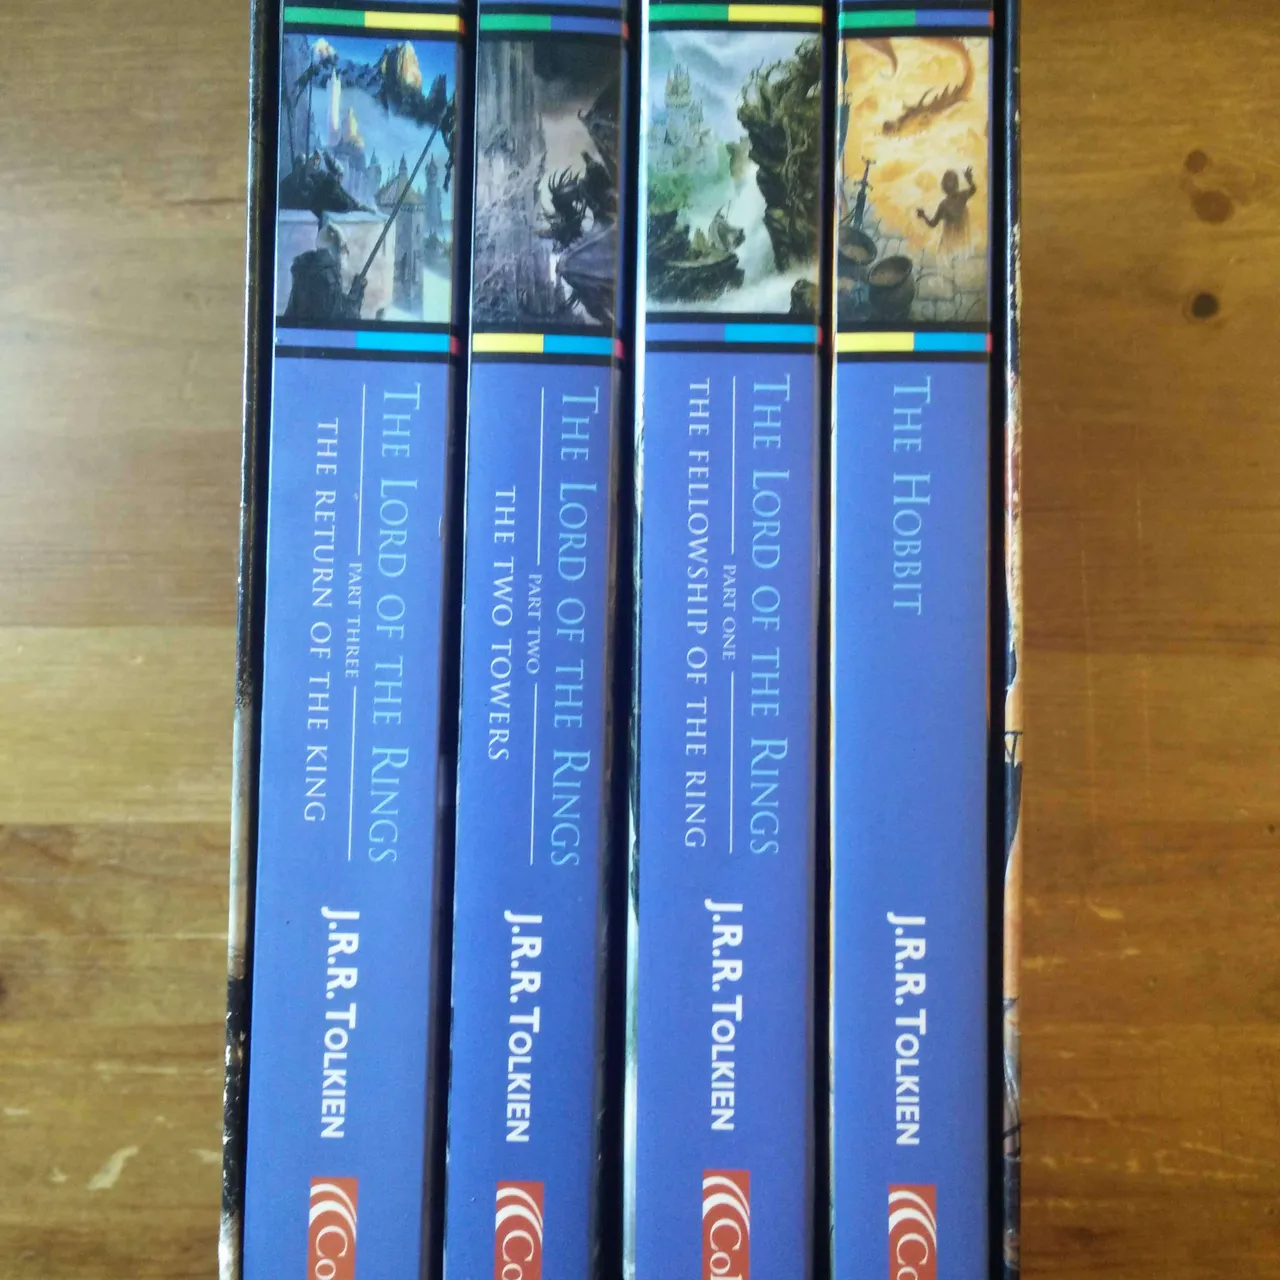 The Lord of the Rings Box Set by J.R.R. Tolkien photo 3